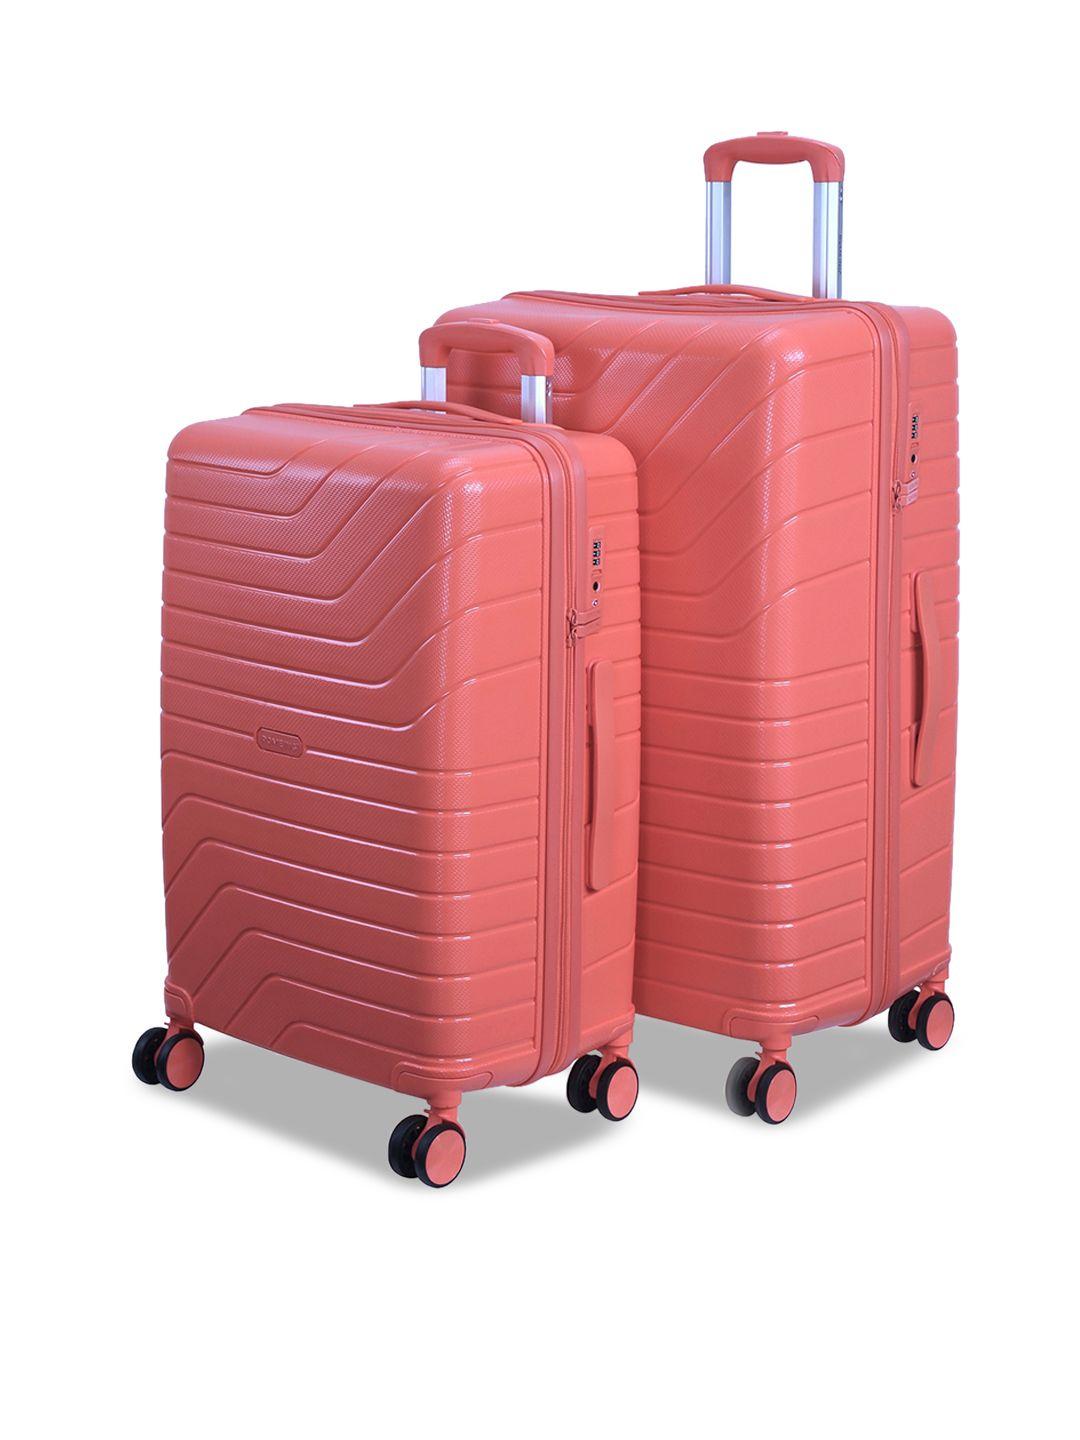 romeing tuscany set of 2 coral red-colored textured hard sided polypropylene trolley bag